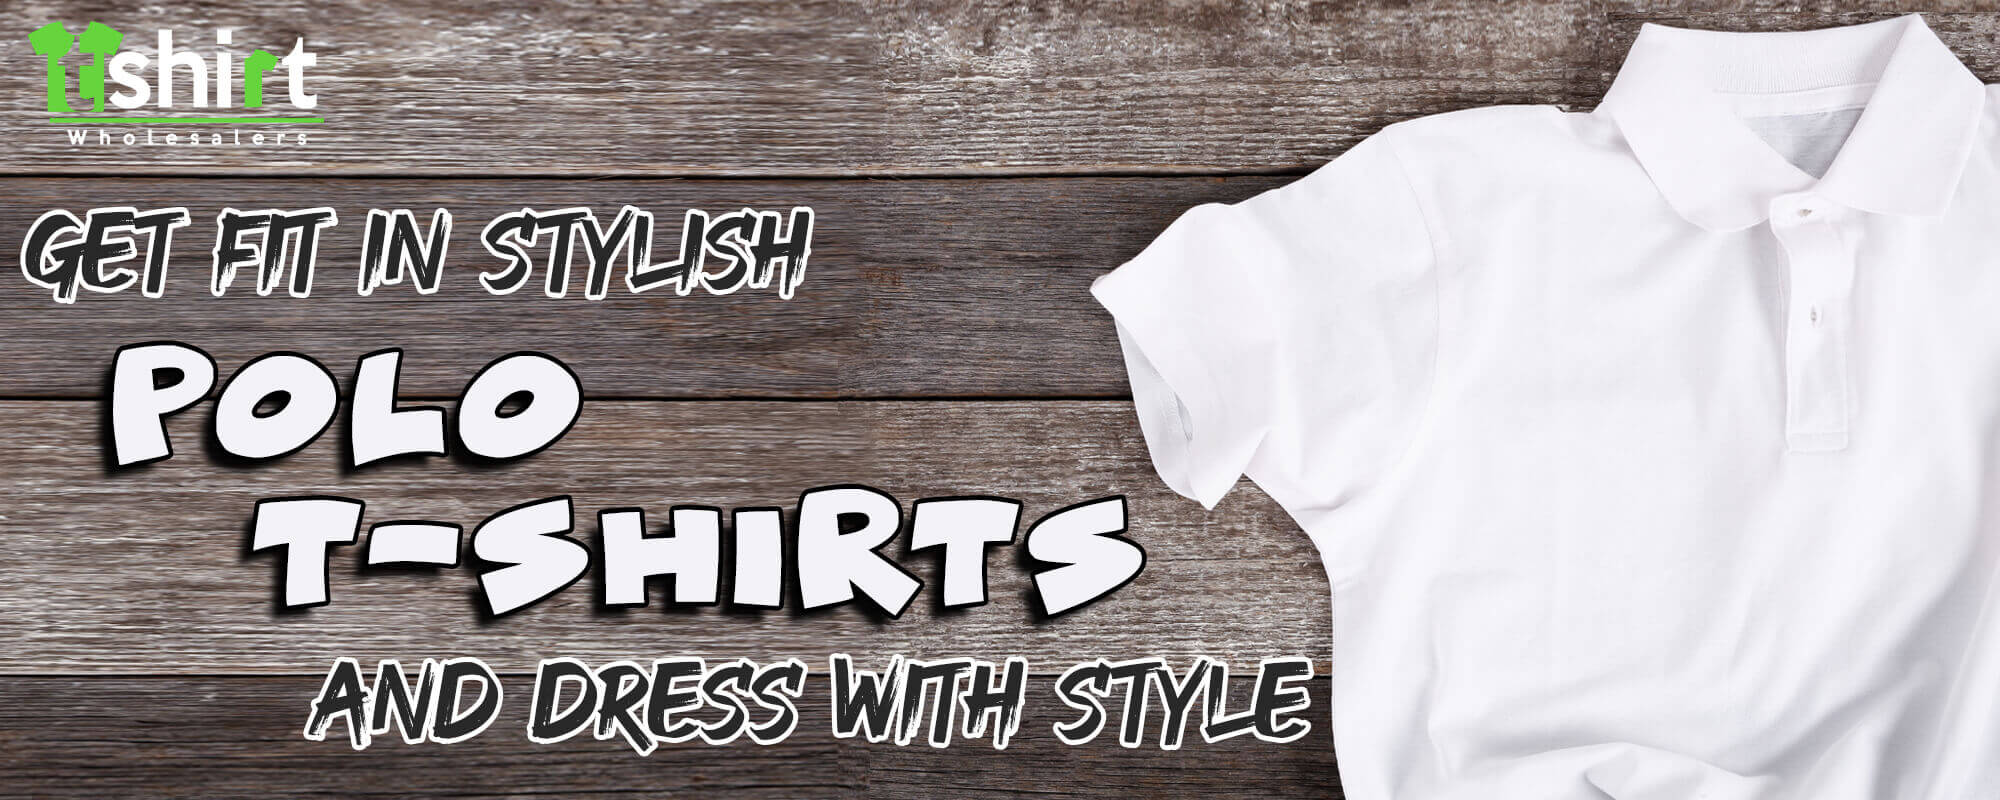 GET FIT IN STYLISH POLO T-SHIRTS AND DRESS WITH STYLE